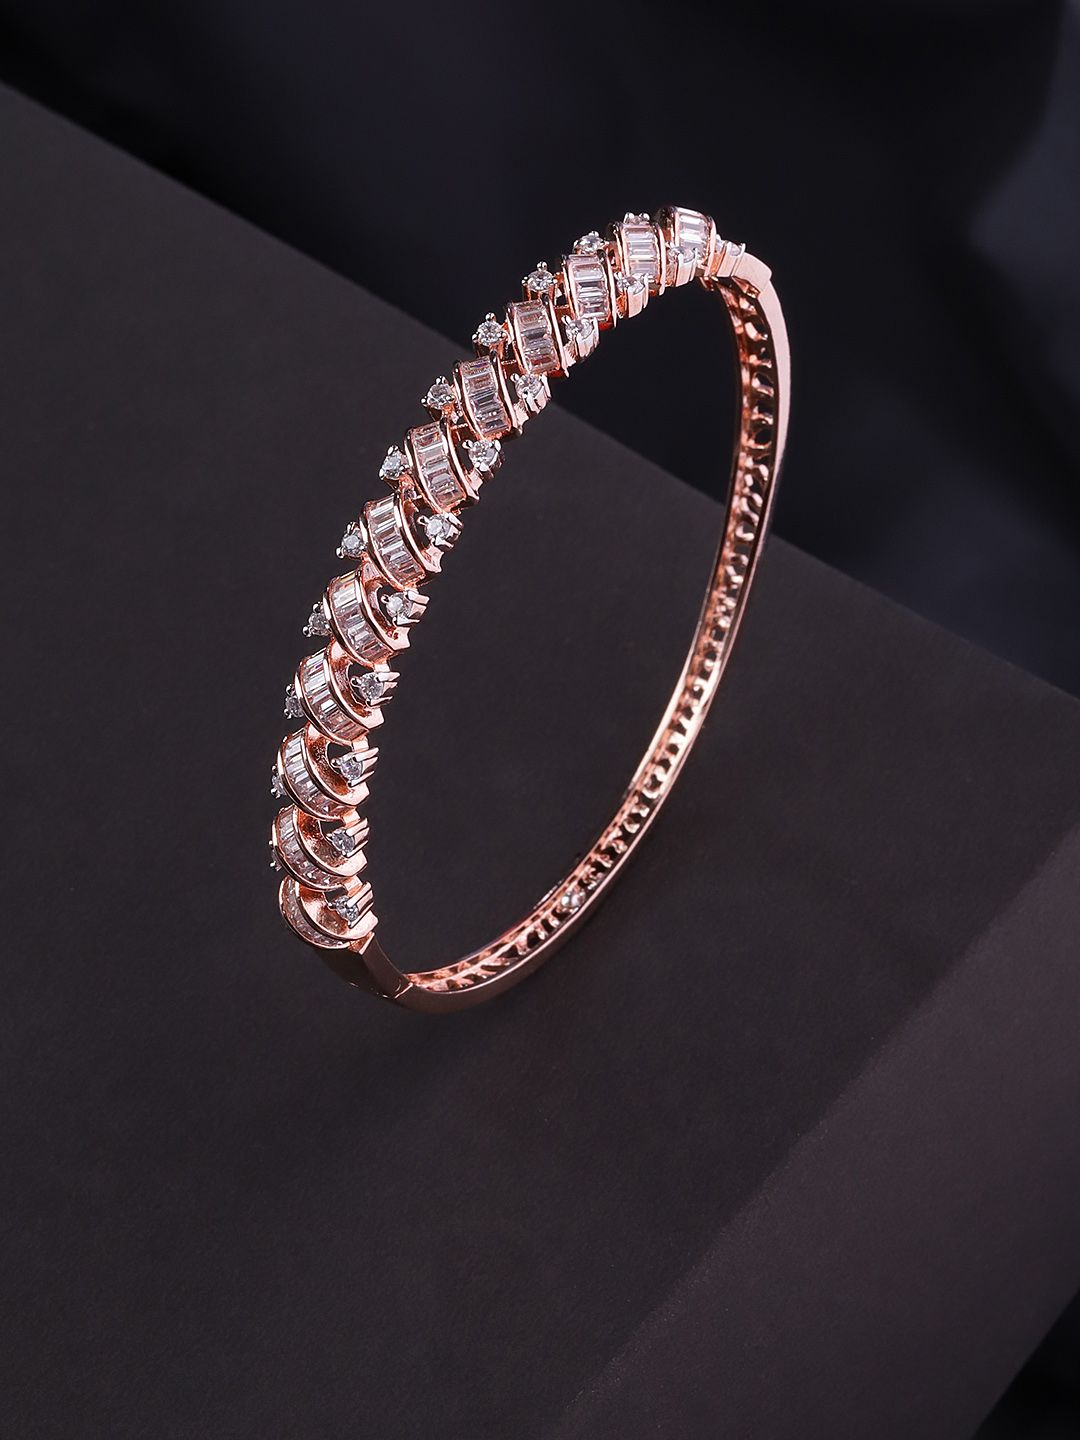 Priyaasi Rose Gold-Plated Handcrafted CZ Stone-Studded Bangle-Style Bracelet Price in India